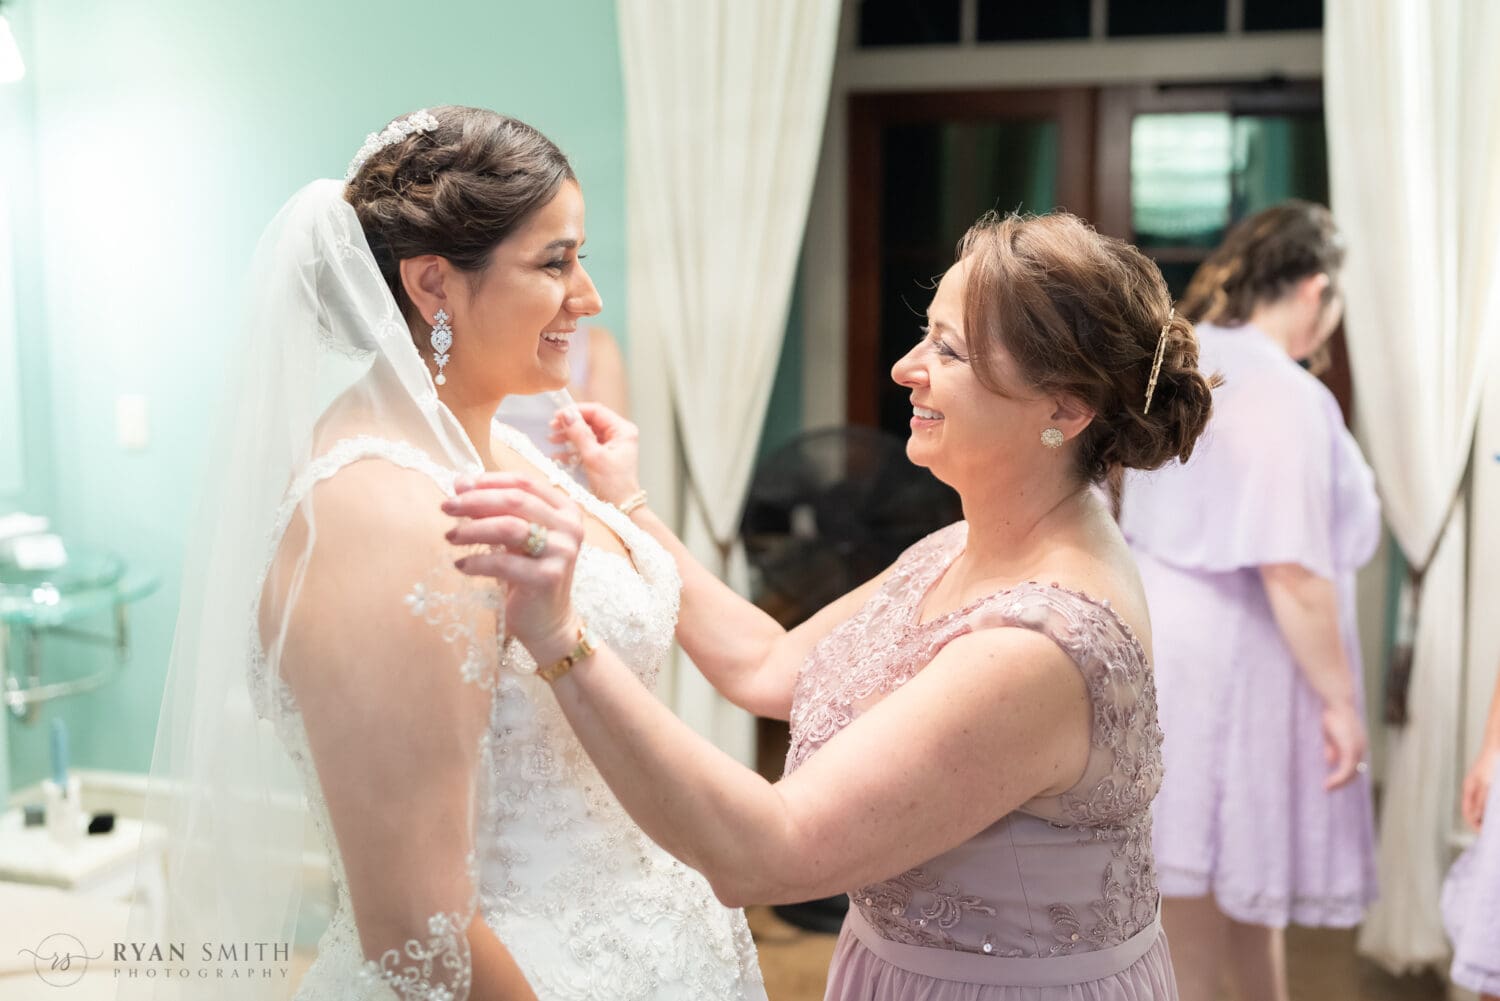 Mom pulling bride's veil over her shoulders  - 21 Main Events at North Beach